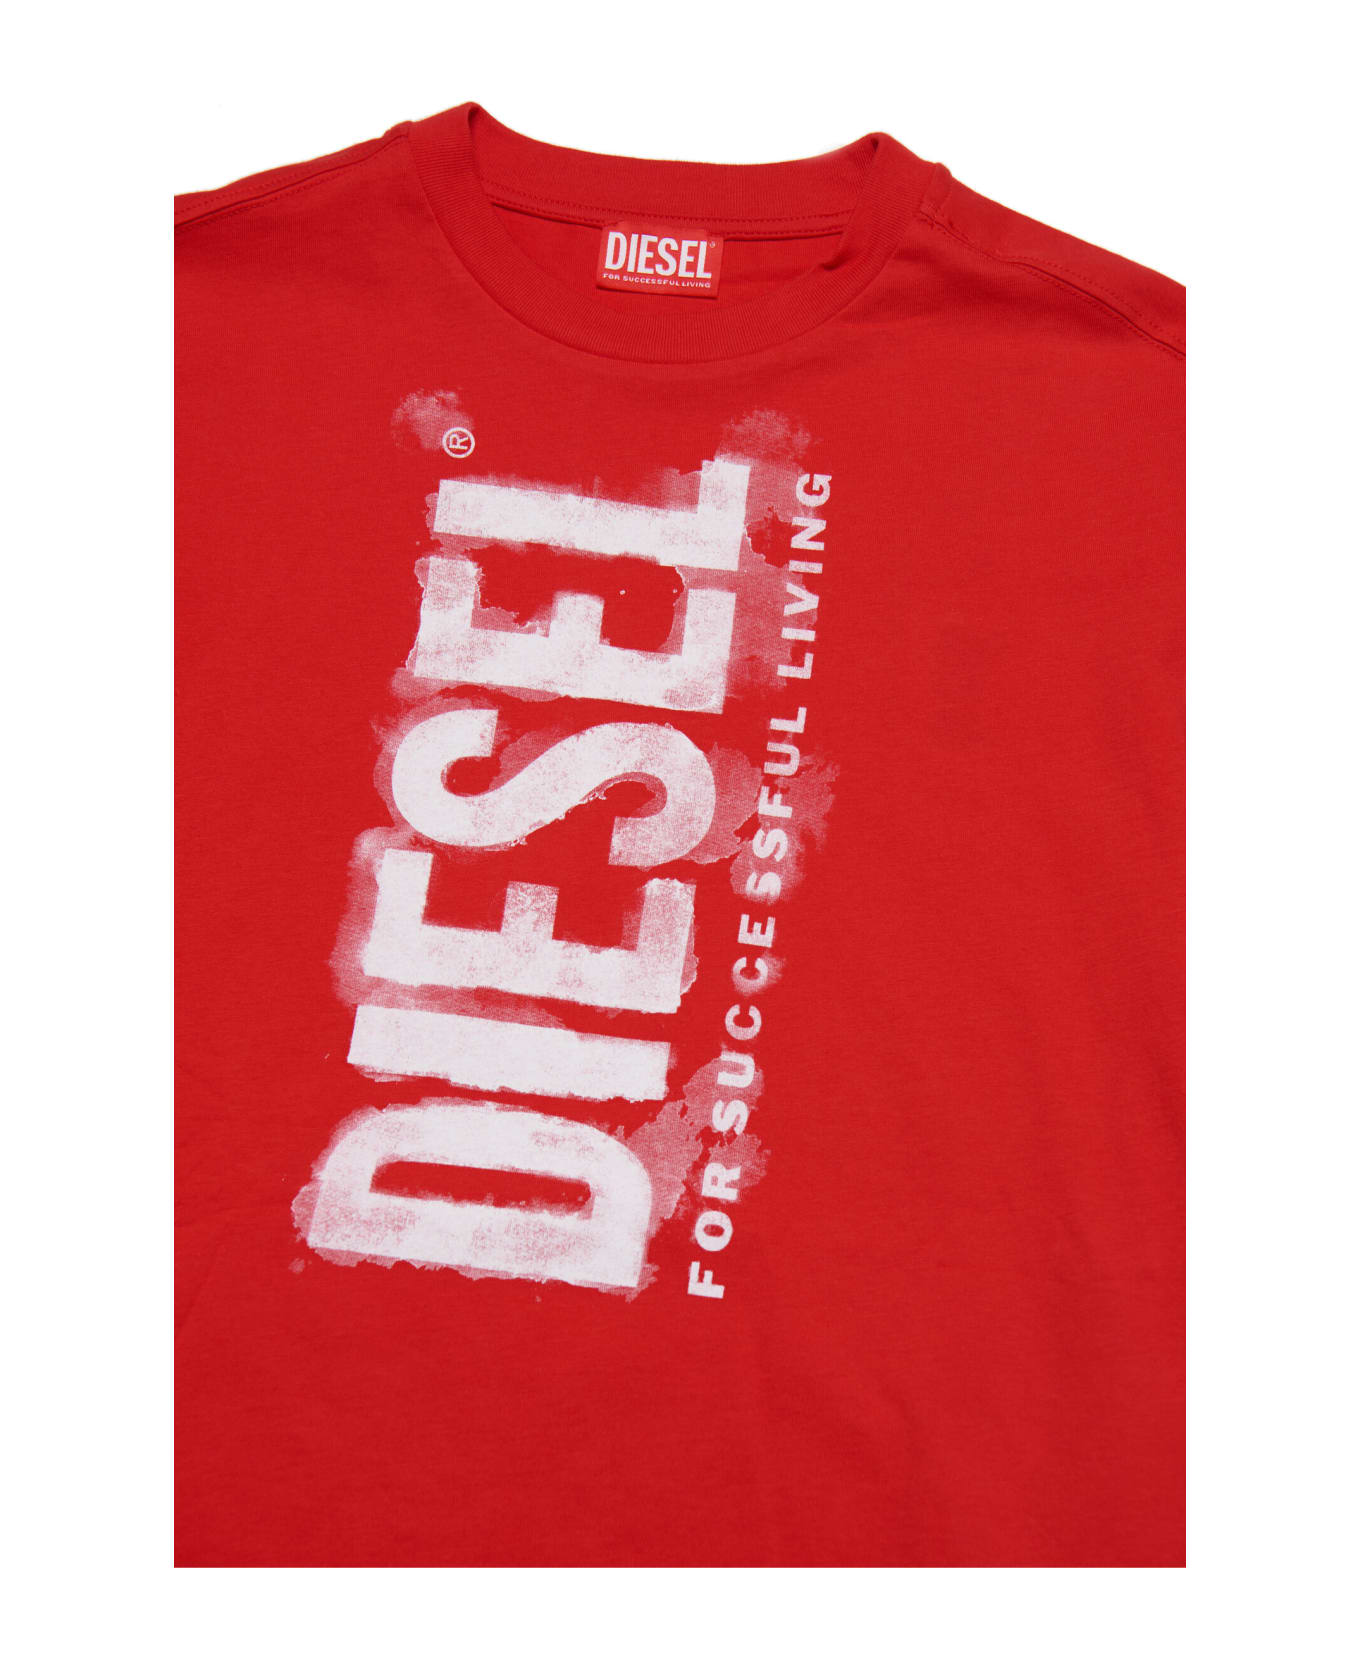 Diesel Dextry Dress Diesel Red Maxi T-shirt Dress With Watercolor Effect Logo - Carnation red